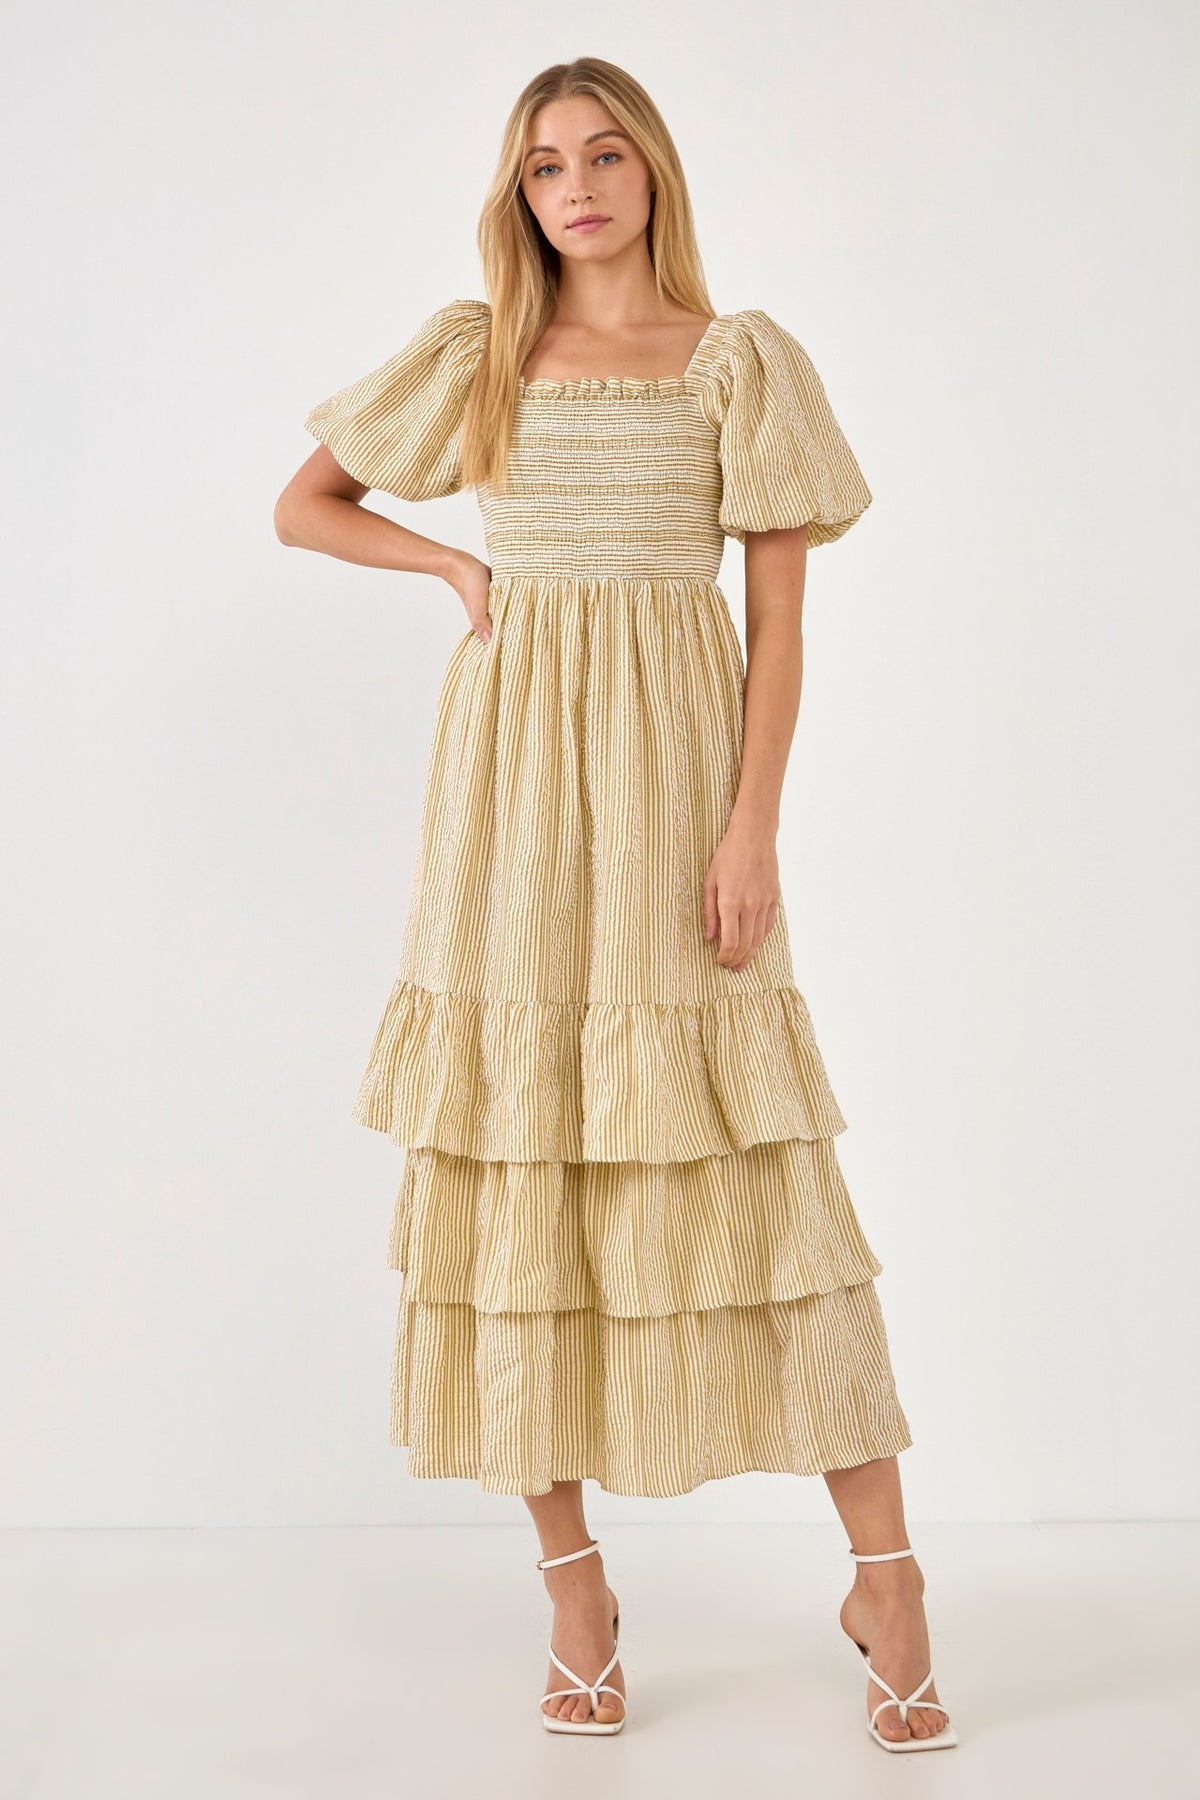 FREE THE ROSES - Striped Maxi Dress with Ruffles - DRESSES available at Objectrare